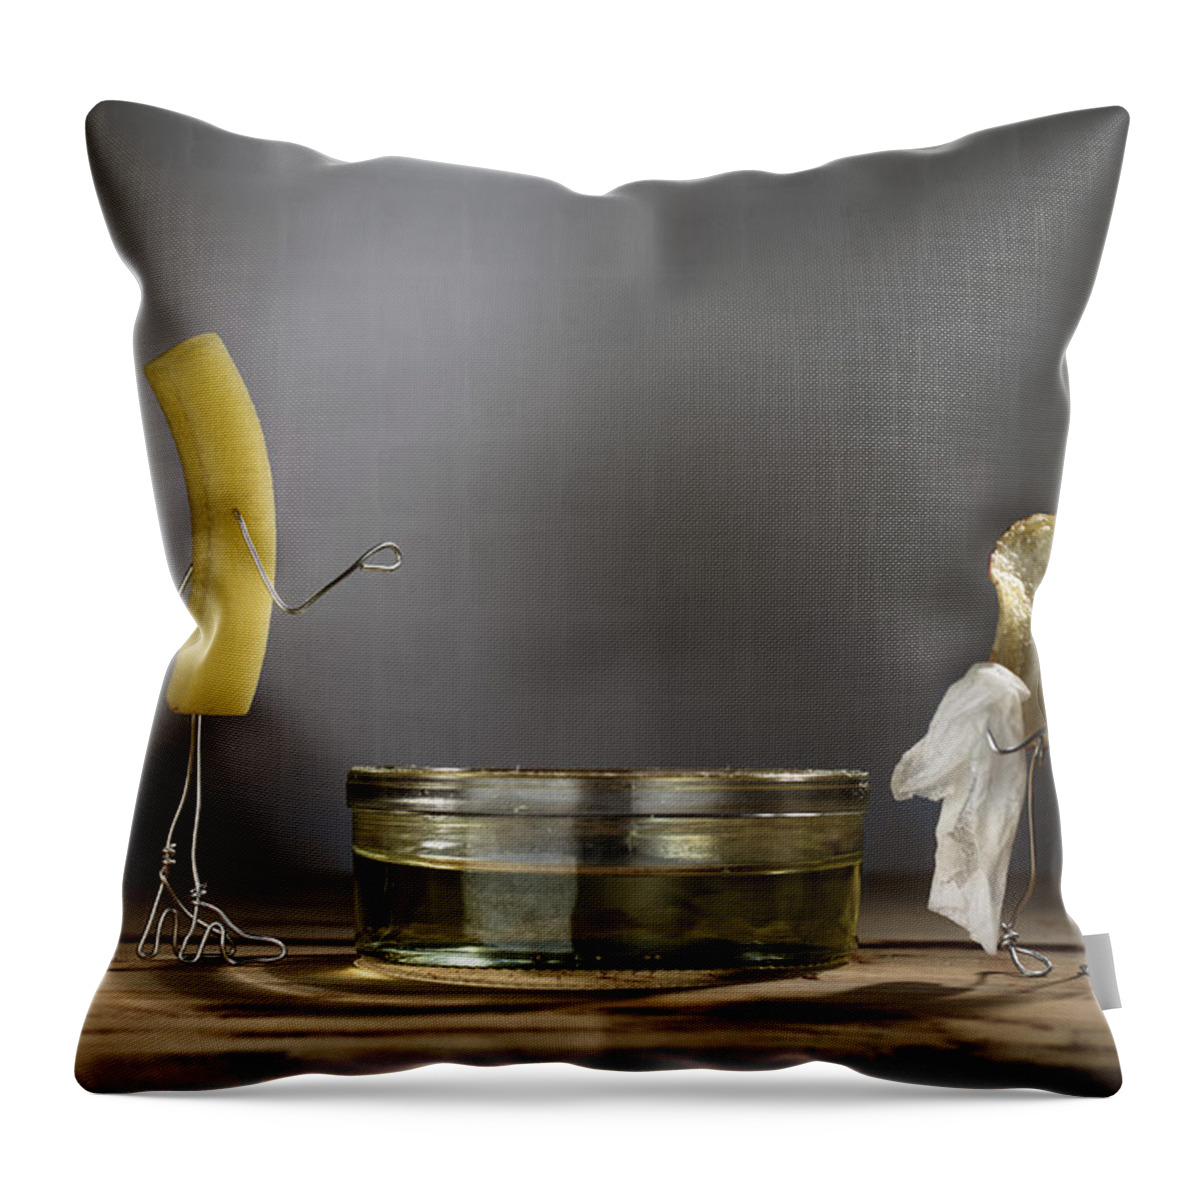 Simple Things Throw Pillow featuring the photograph Simple Things - Potatoes by Nailia Schwarz